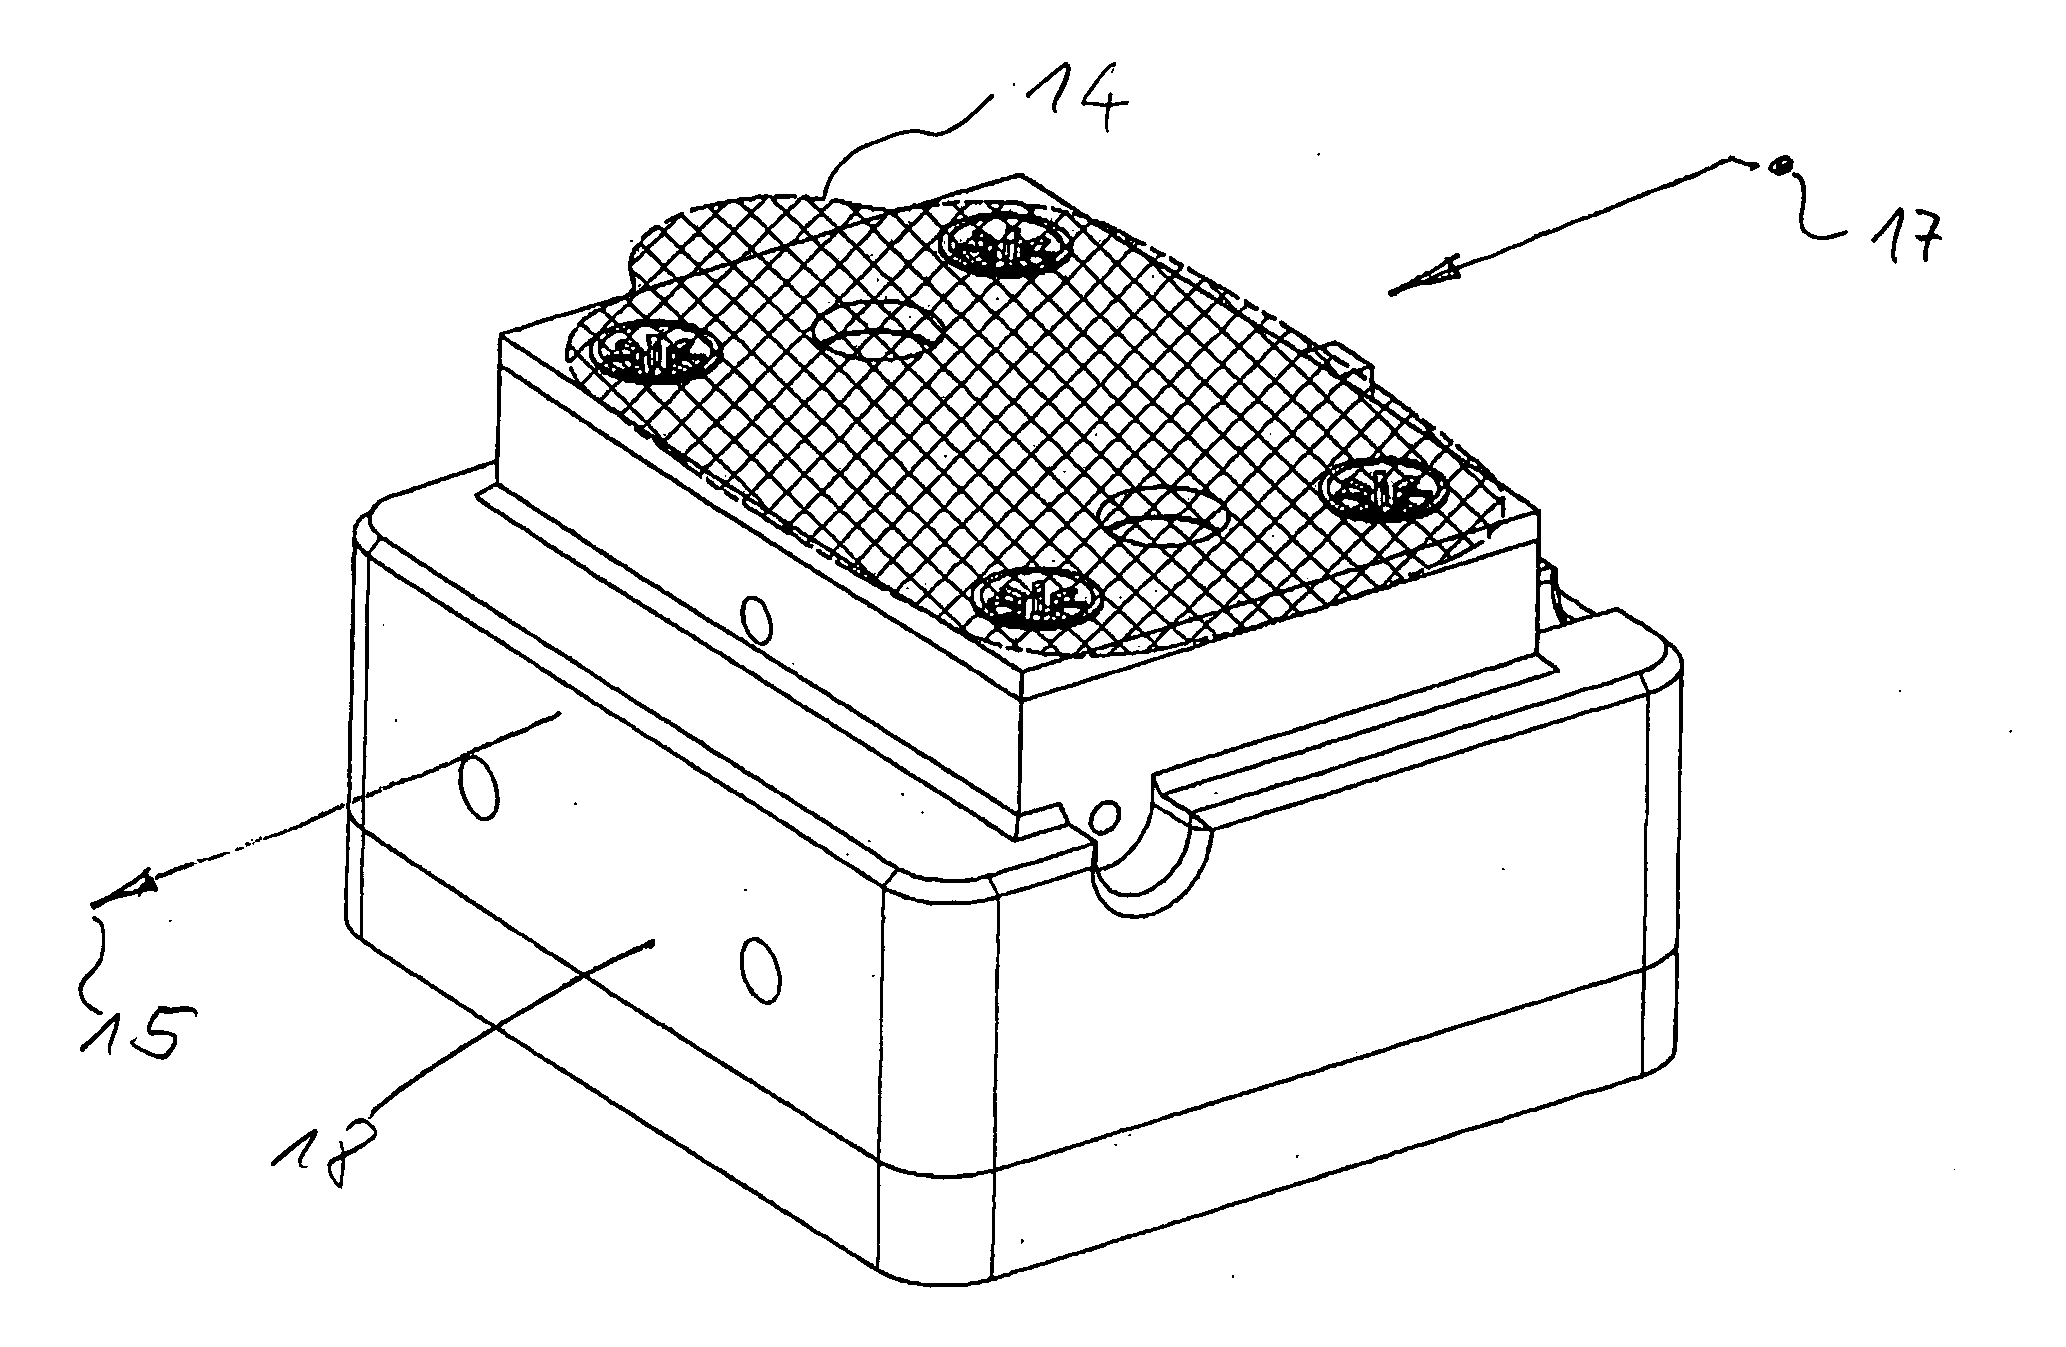 Method of manufacturing container top parts forming container lids